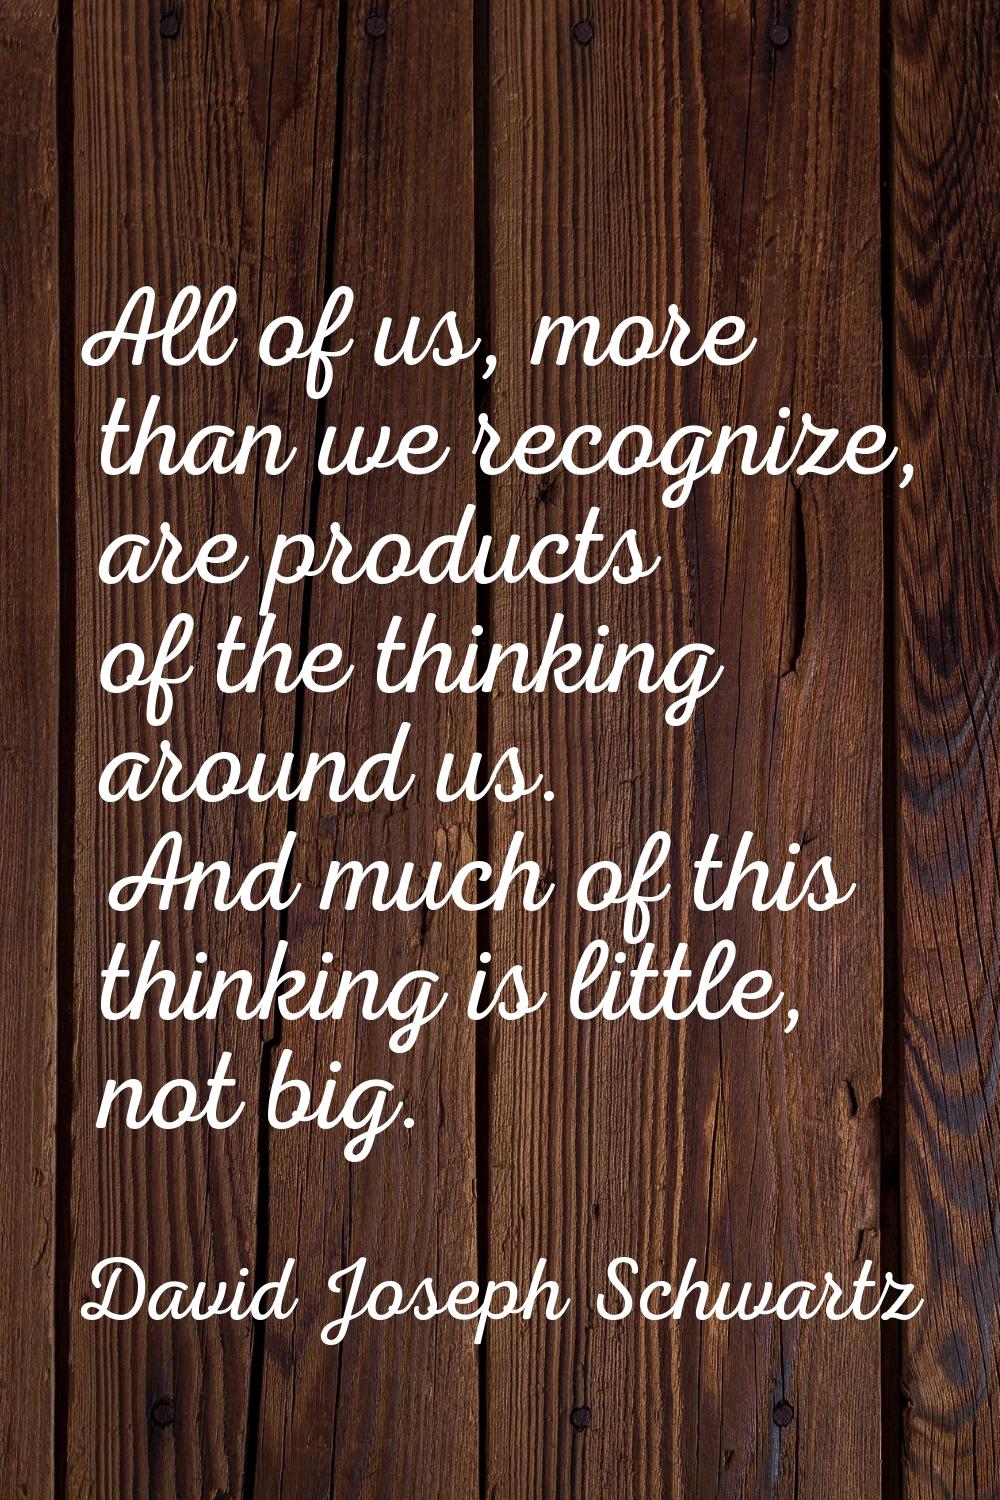 All of us, more than we recognize, are products of the thinking around us. And much of this thinkin